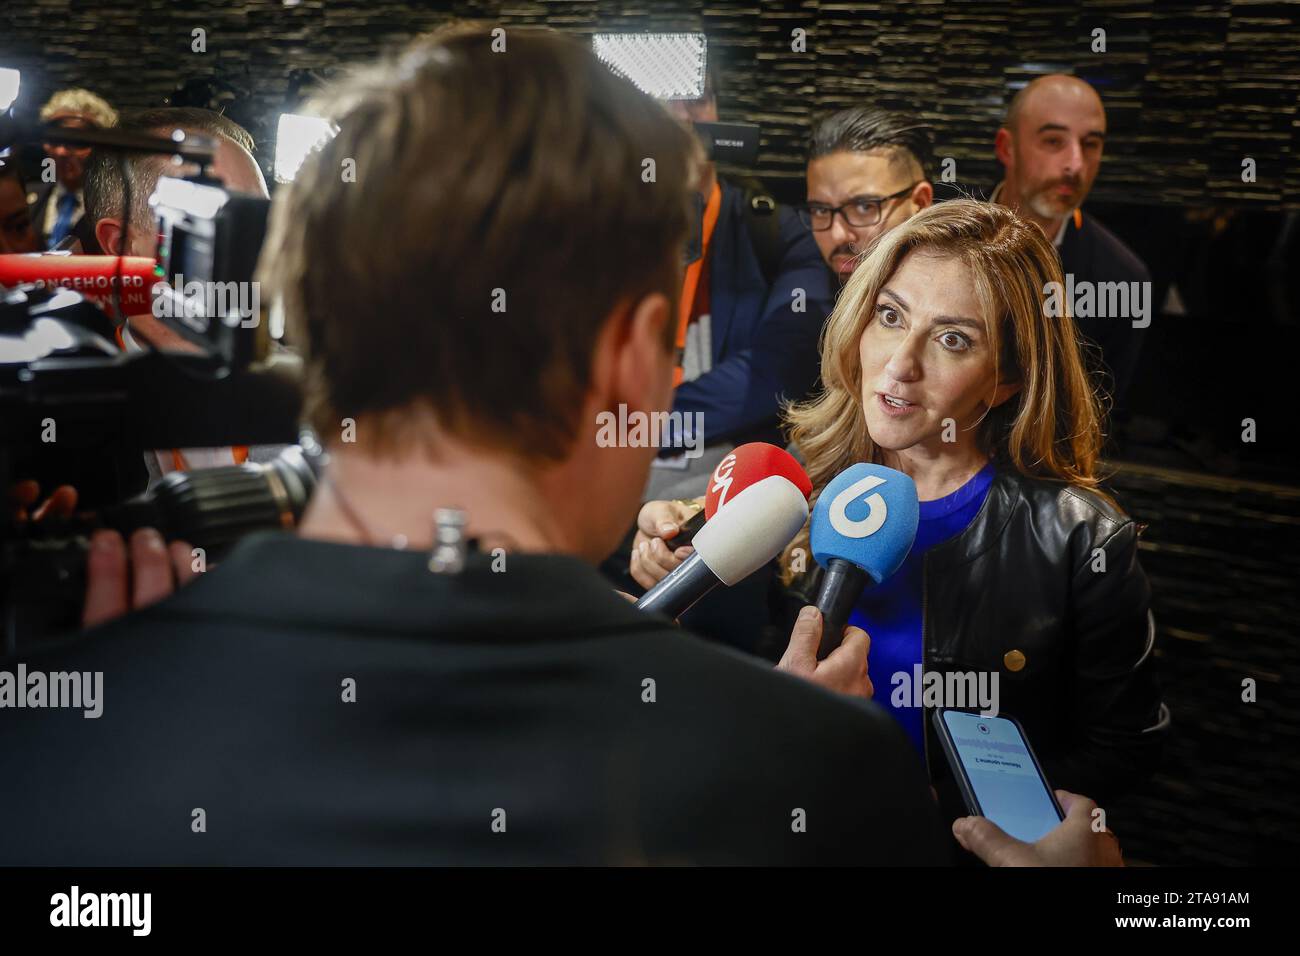 UTRECHT - VVD leader Dilan Yesilgoz speaks to the media after a public meeting with members of the VVD. Party leader Dilan Yesilgoz speaks to supporters about the possibilities of participating in a new cabinet. ANP SEM VAN DER WAL netherlands out - belgium out Stock Photo